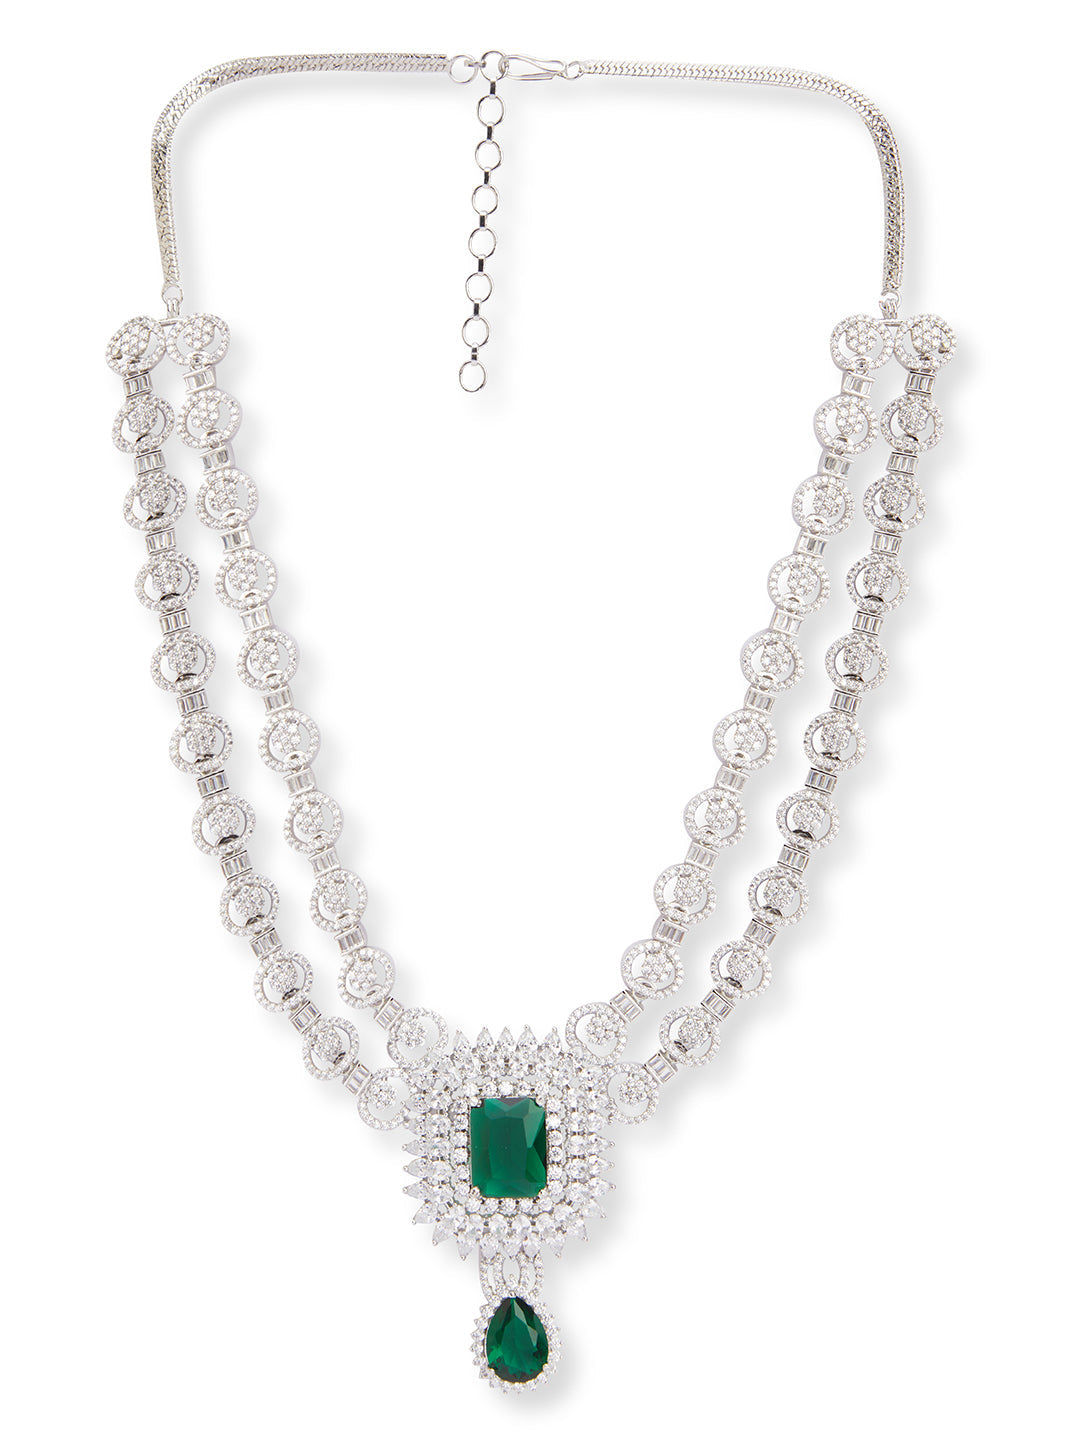 Lot - 18 Karat White, Yellow Gold Diamond and Emerald Necklace with  Matching Drop Earrings